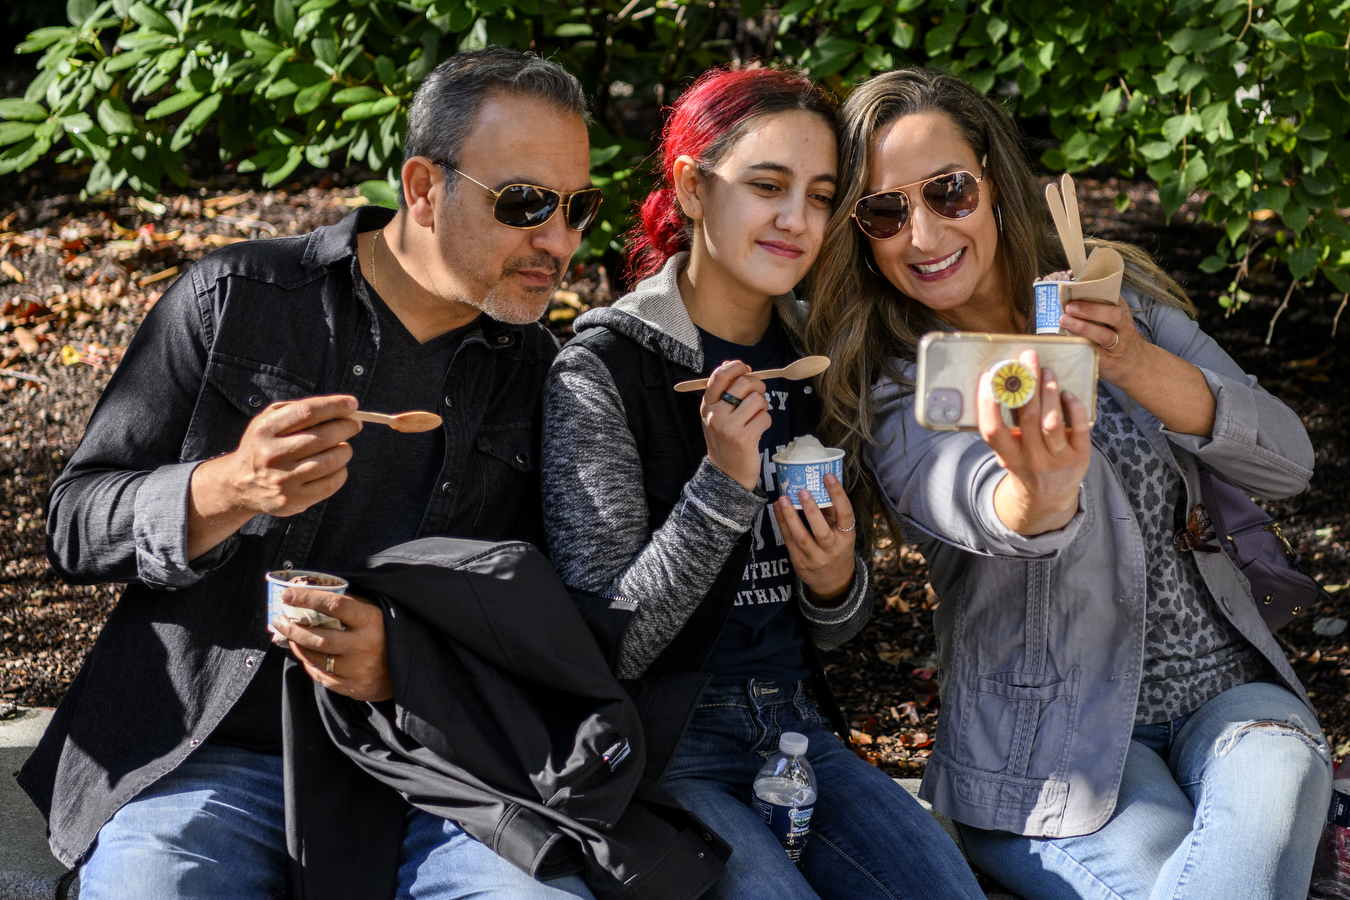 Three people are taking a picture together while they eat ice cream at Northeastern's Family and Friends Weekend.